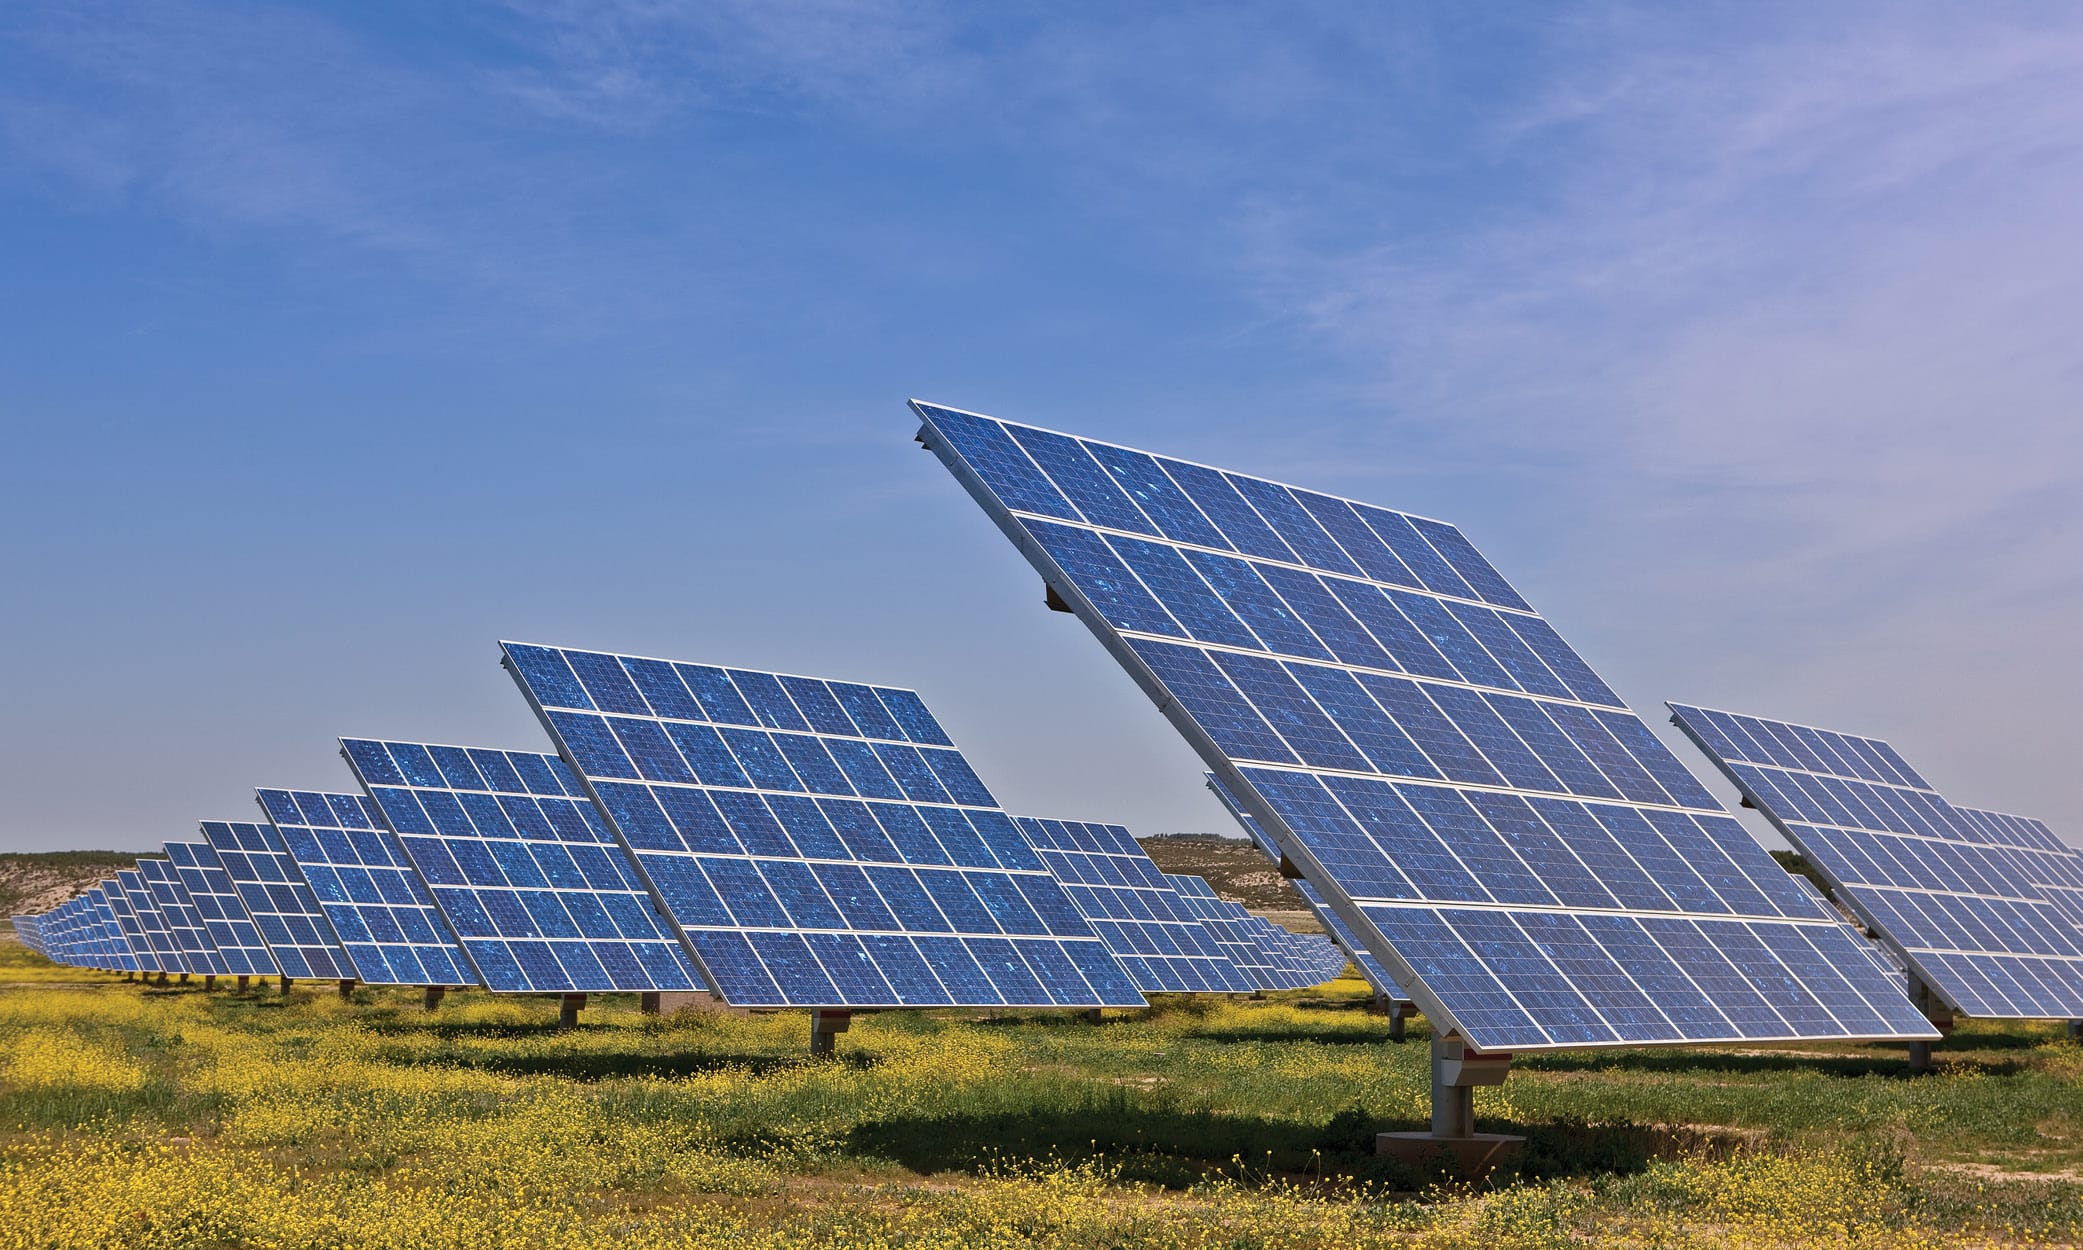 NSW DPE Draft Revised Large-Scale Solar Energy Guidelines